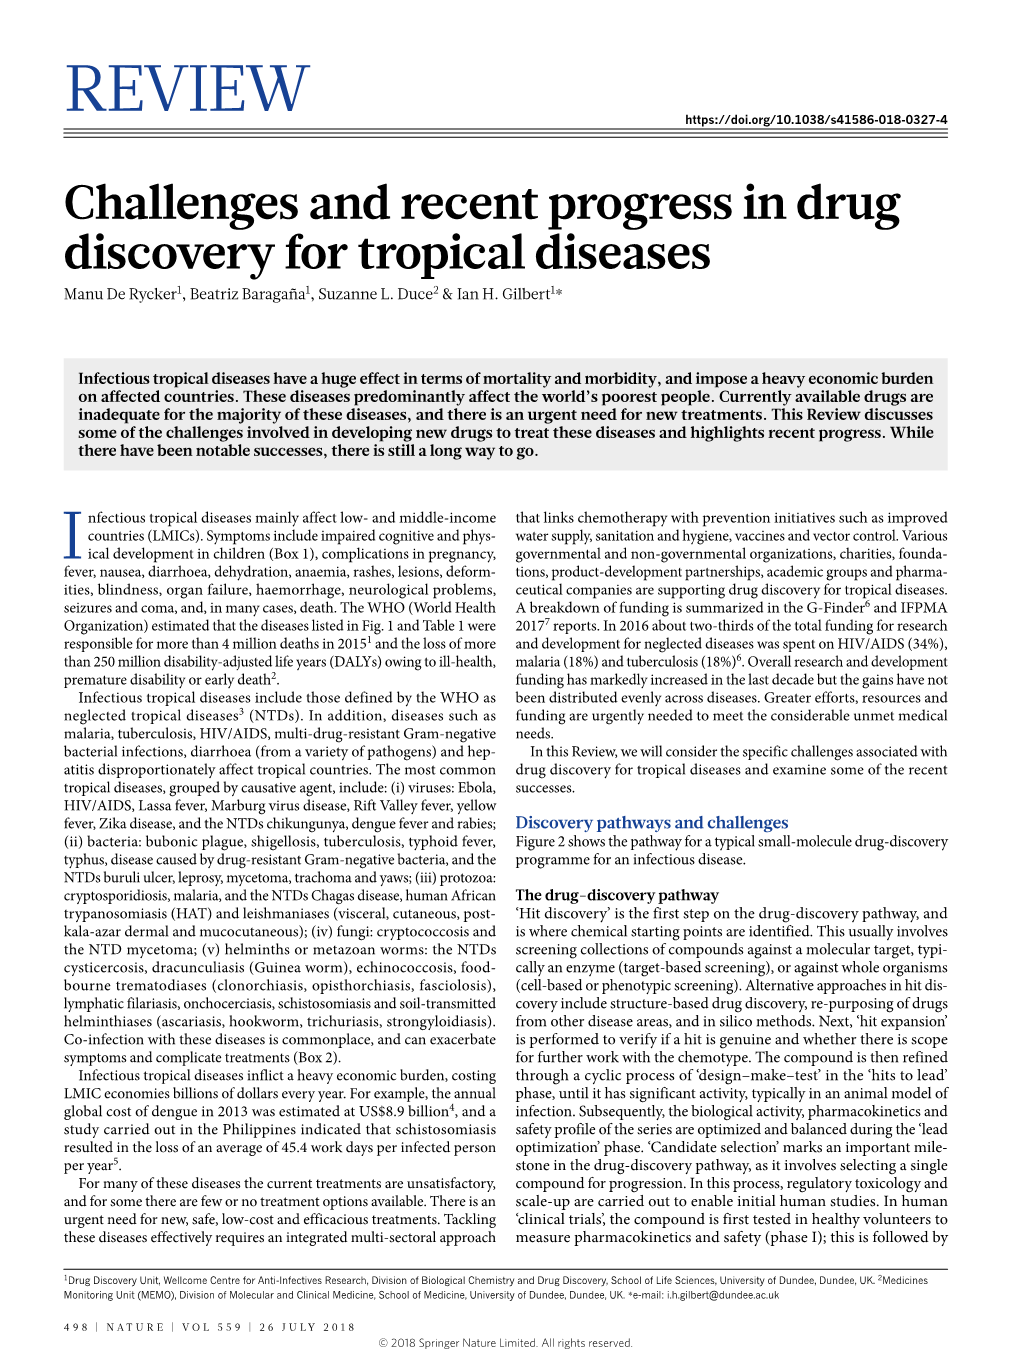 Challenges and Recent Progress in Drug Discovery for Tropical Diseases Manu De Rycker1, Beatriz Baragaña1, Suzanne L